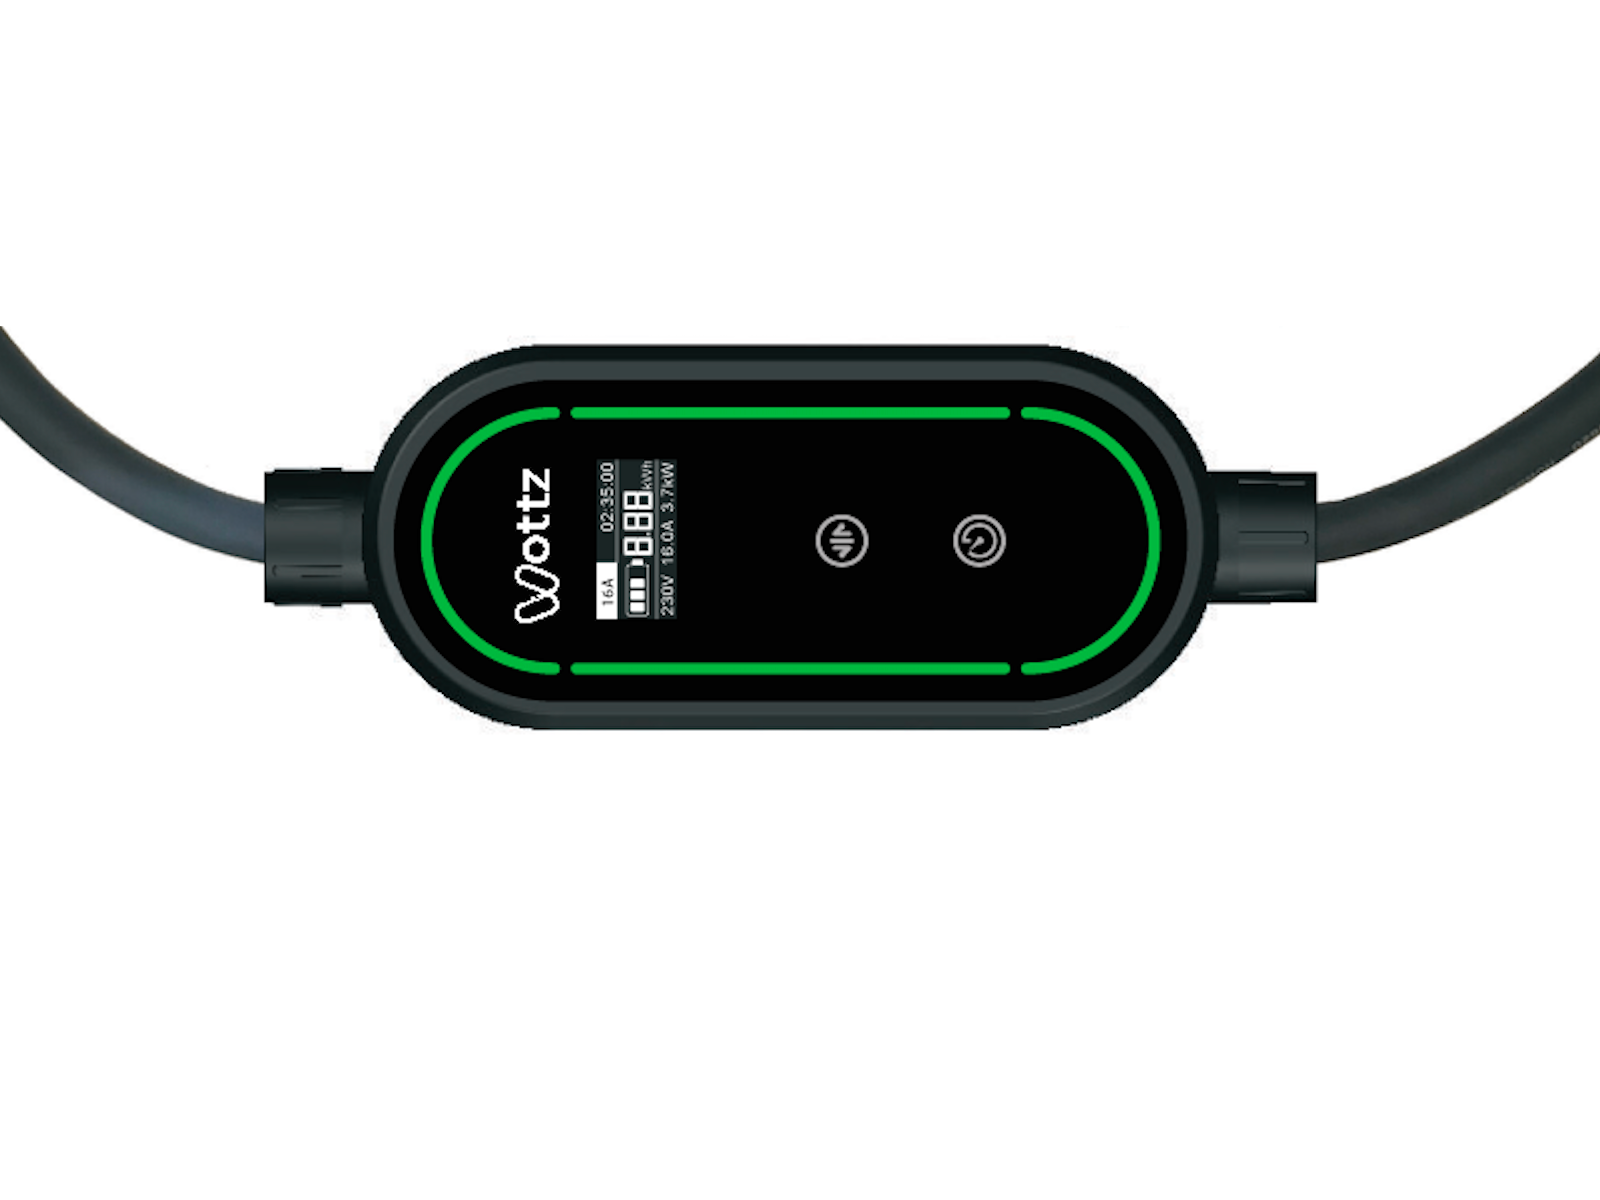 Wottz Type 2 Portable Charger